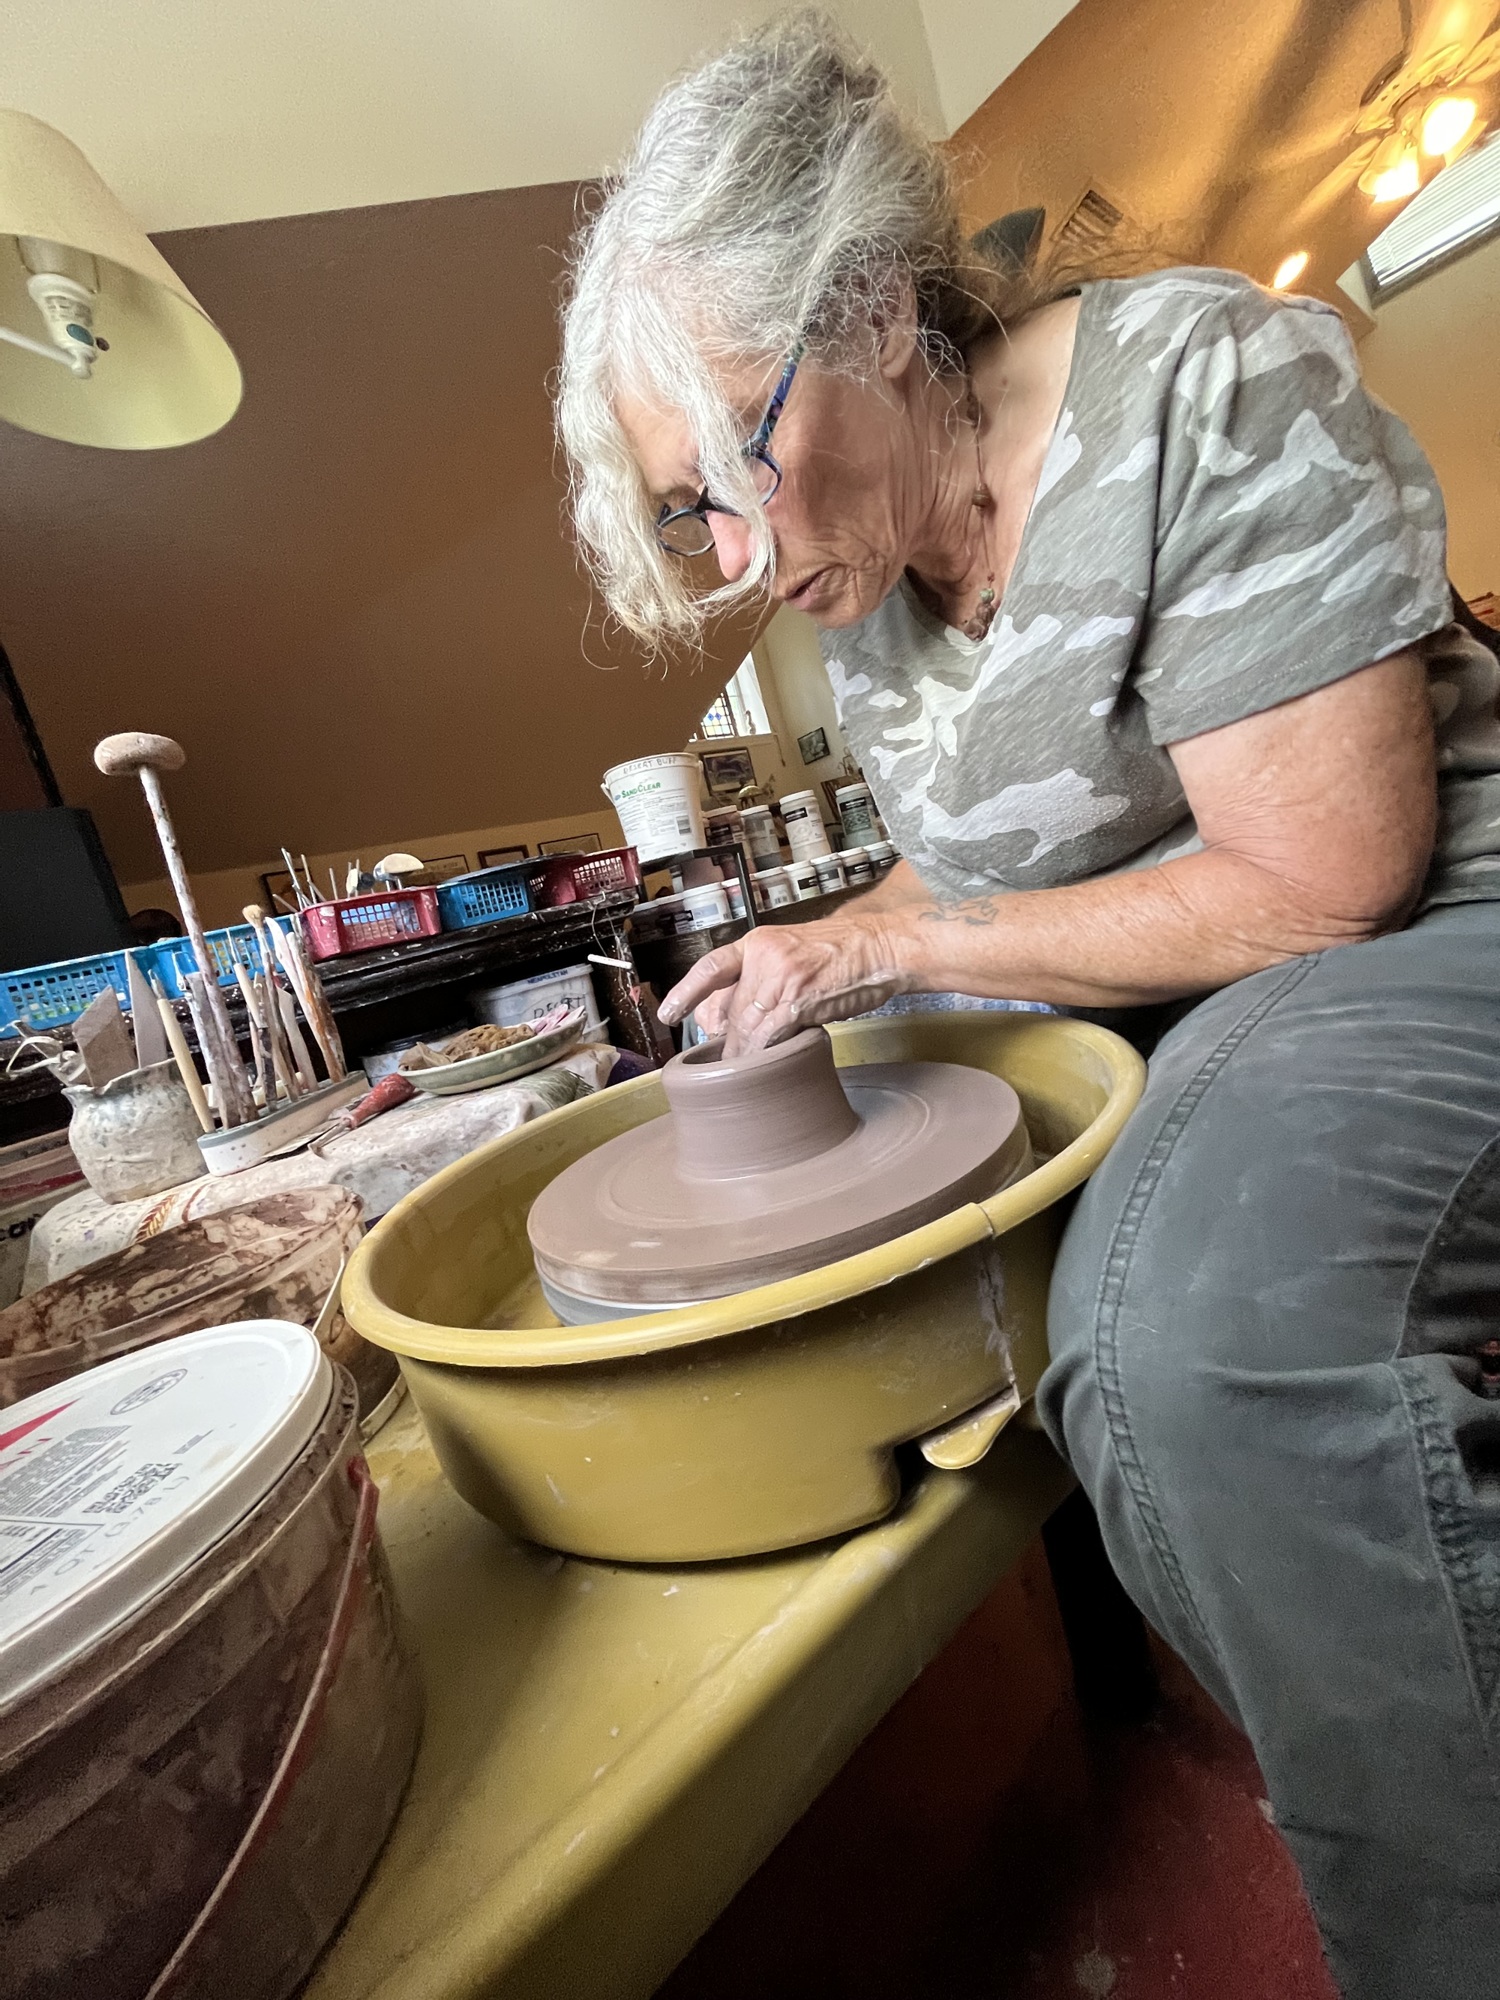 Panther Ridge's Denise Millett-Olverson says she's constantly thinking about different ways she can design her pottery. (Photo by Liz Ramos)